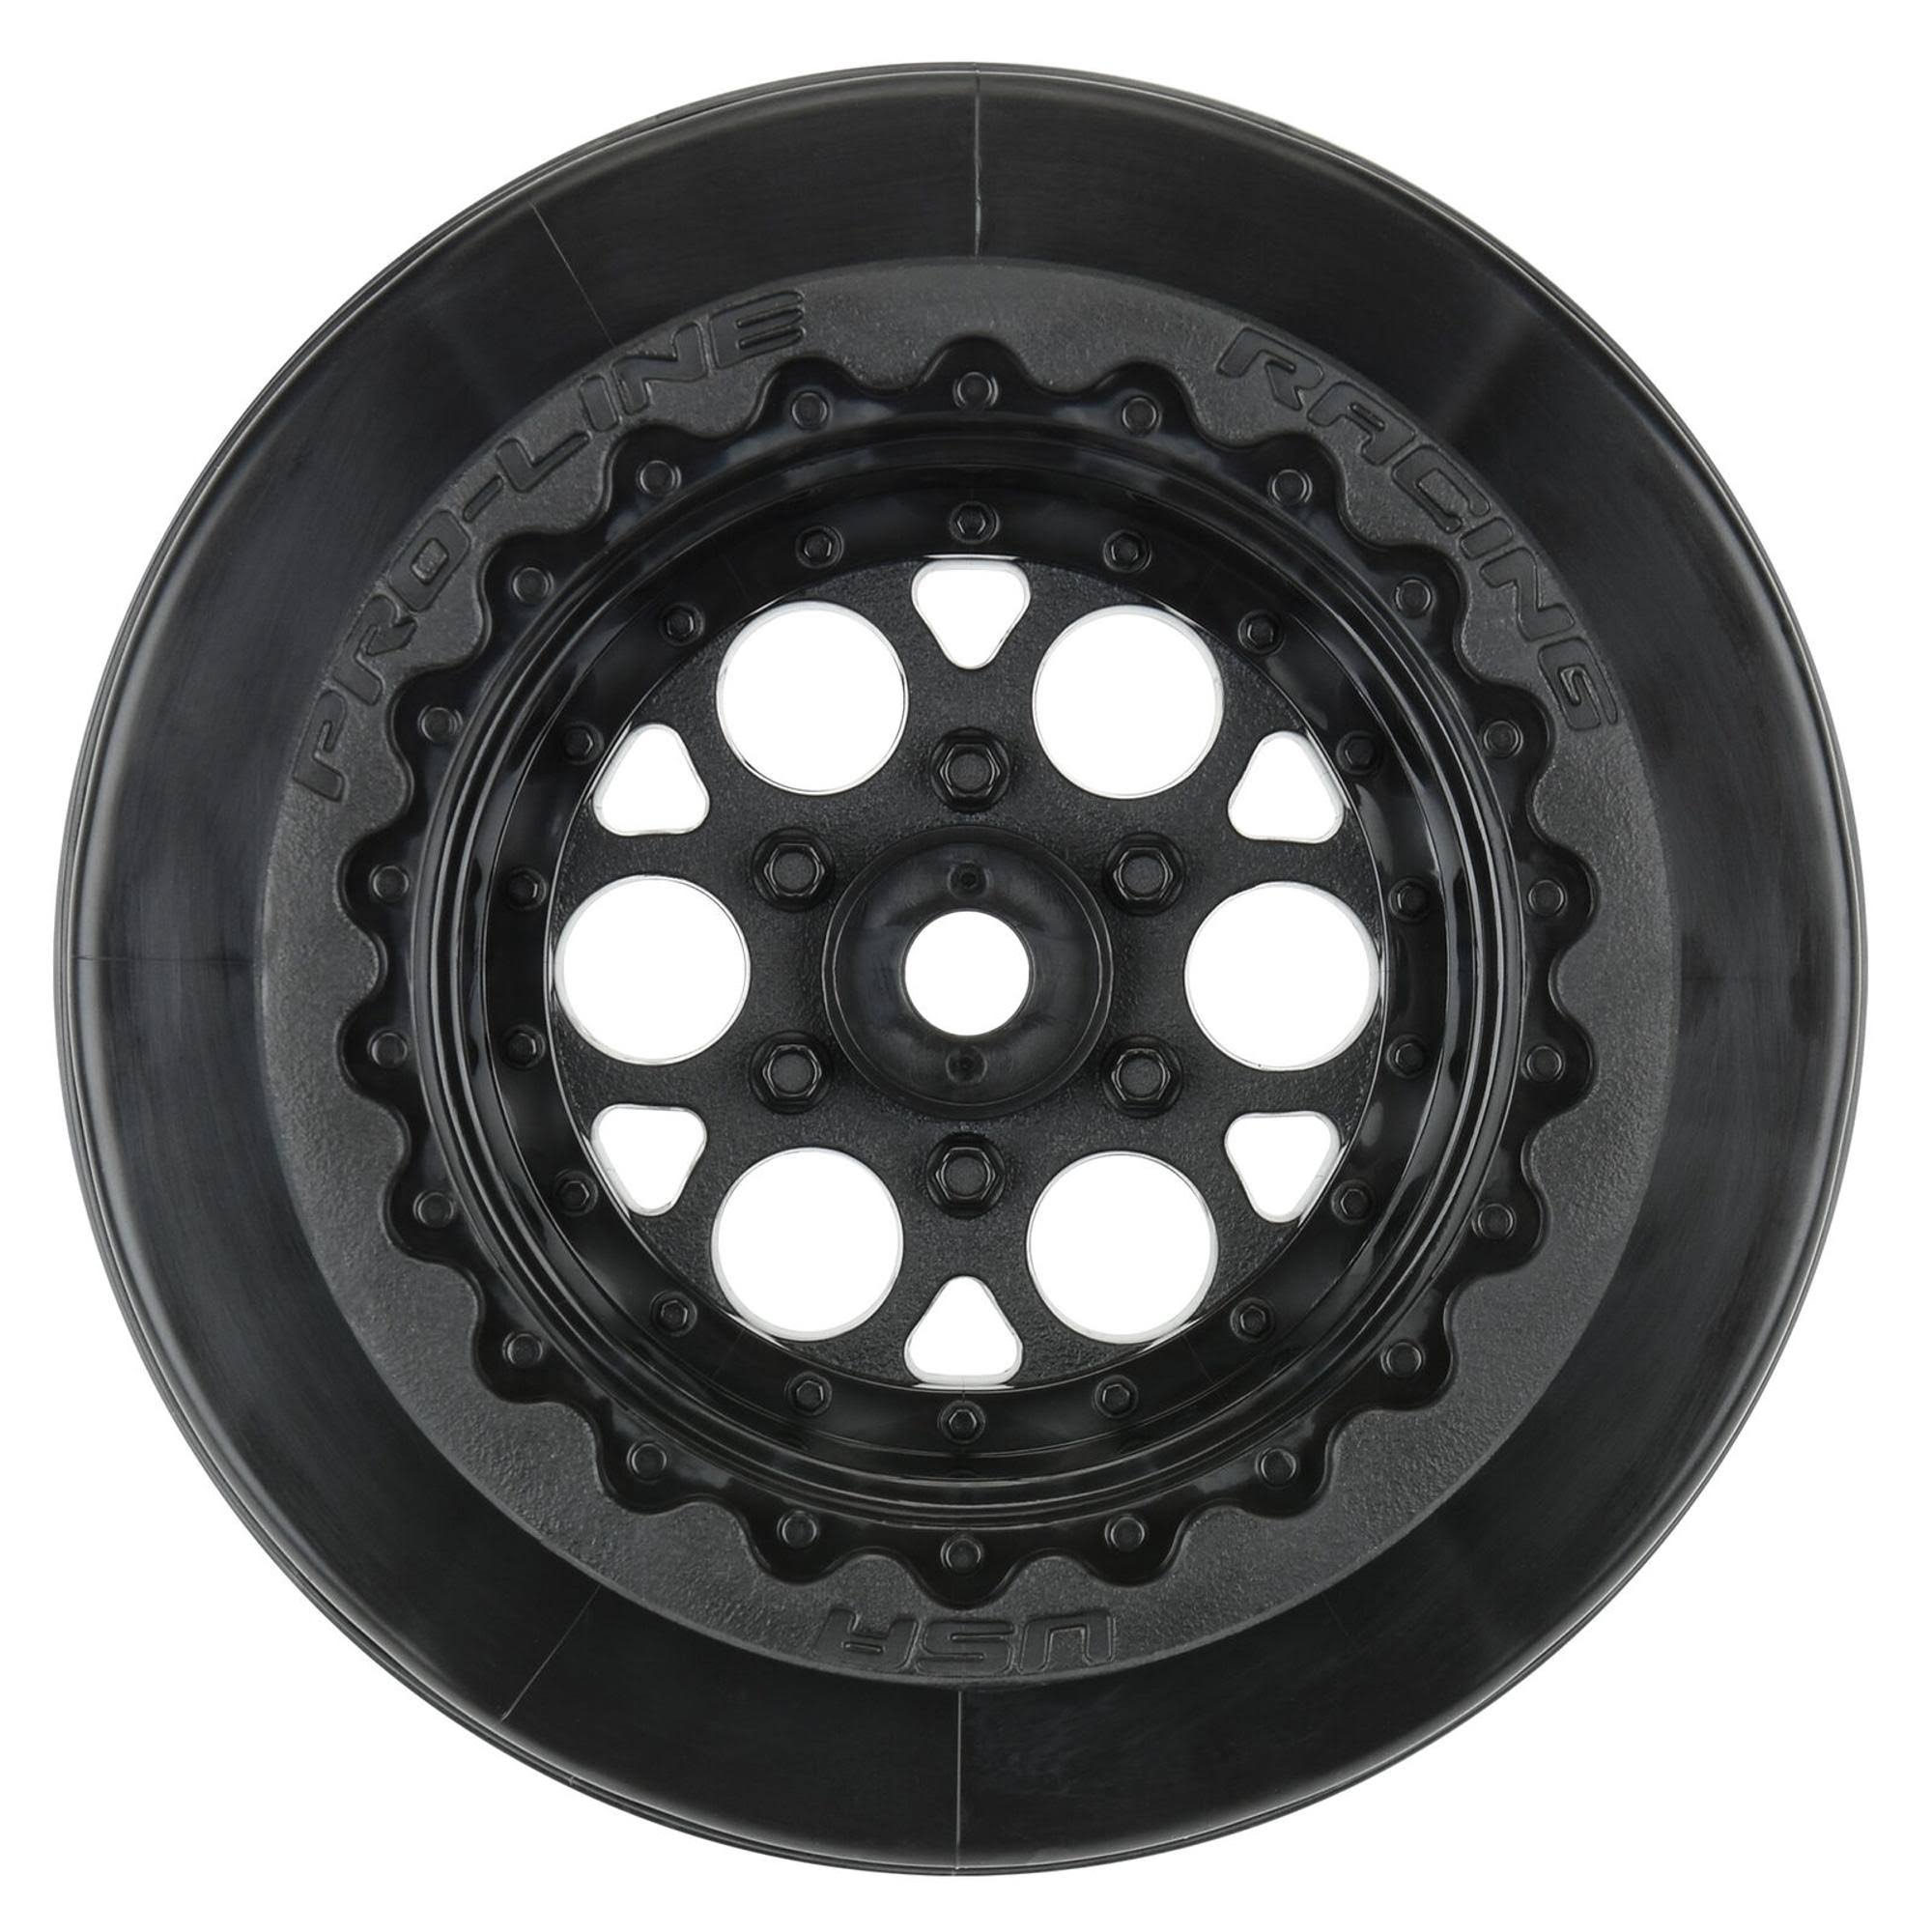 Pro-Line Racing 1/10 Showtime+ Wide Rear 2.2 inch/3.0 inch 12mm Drag Wheels (2) Black, PRO279403